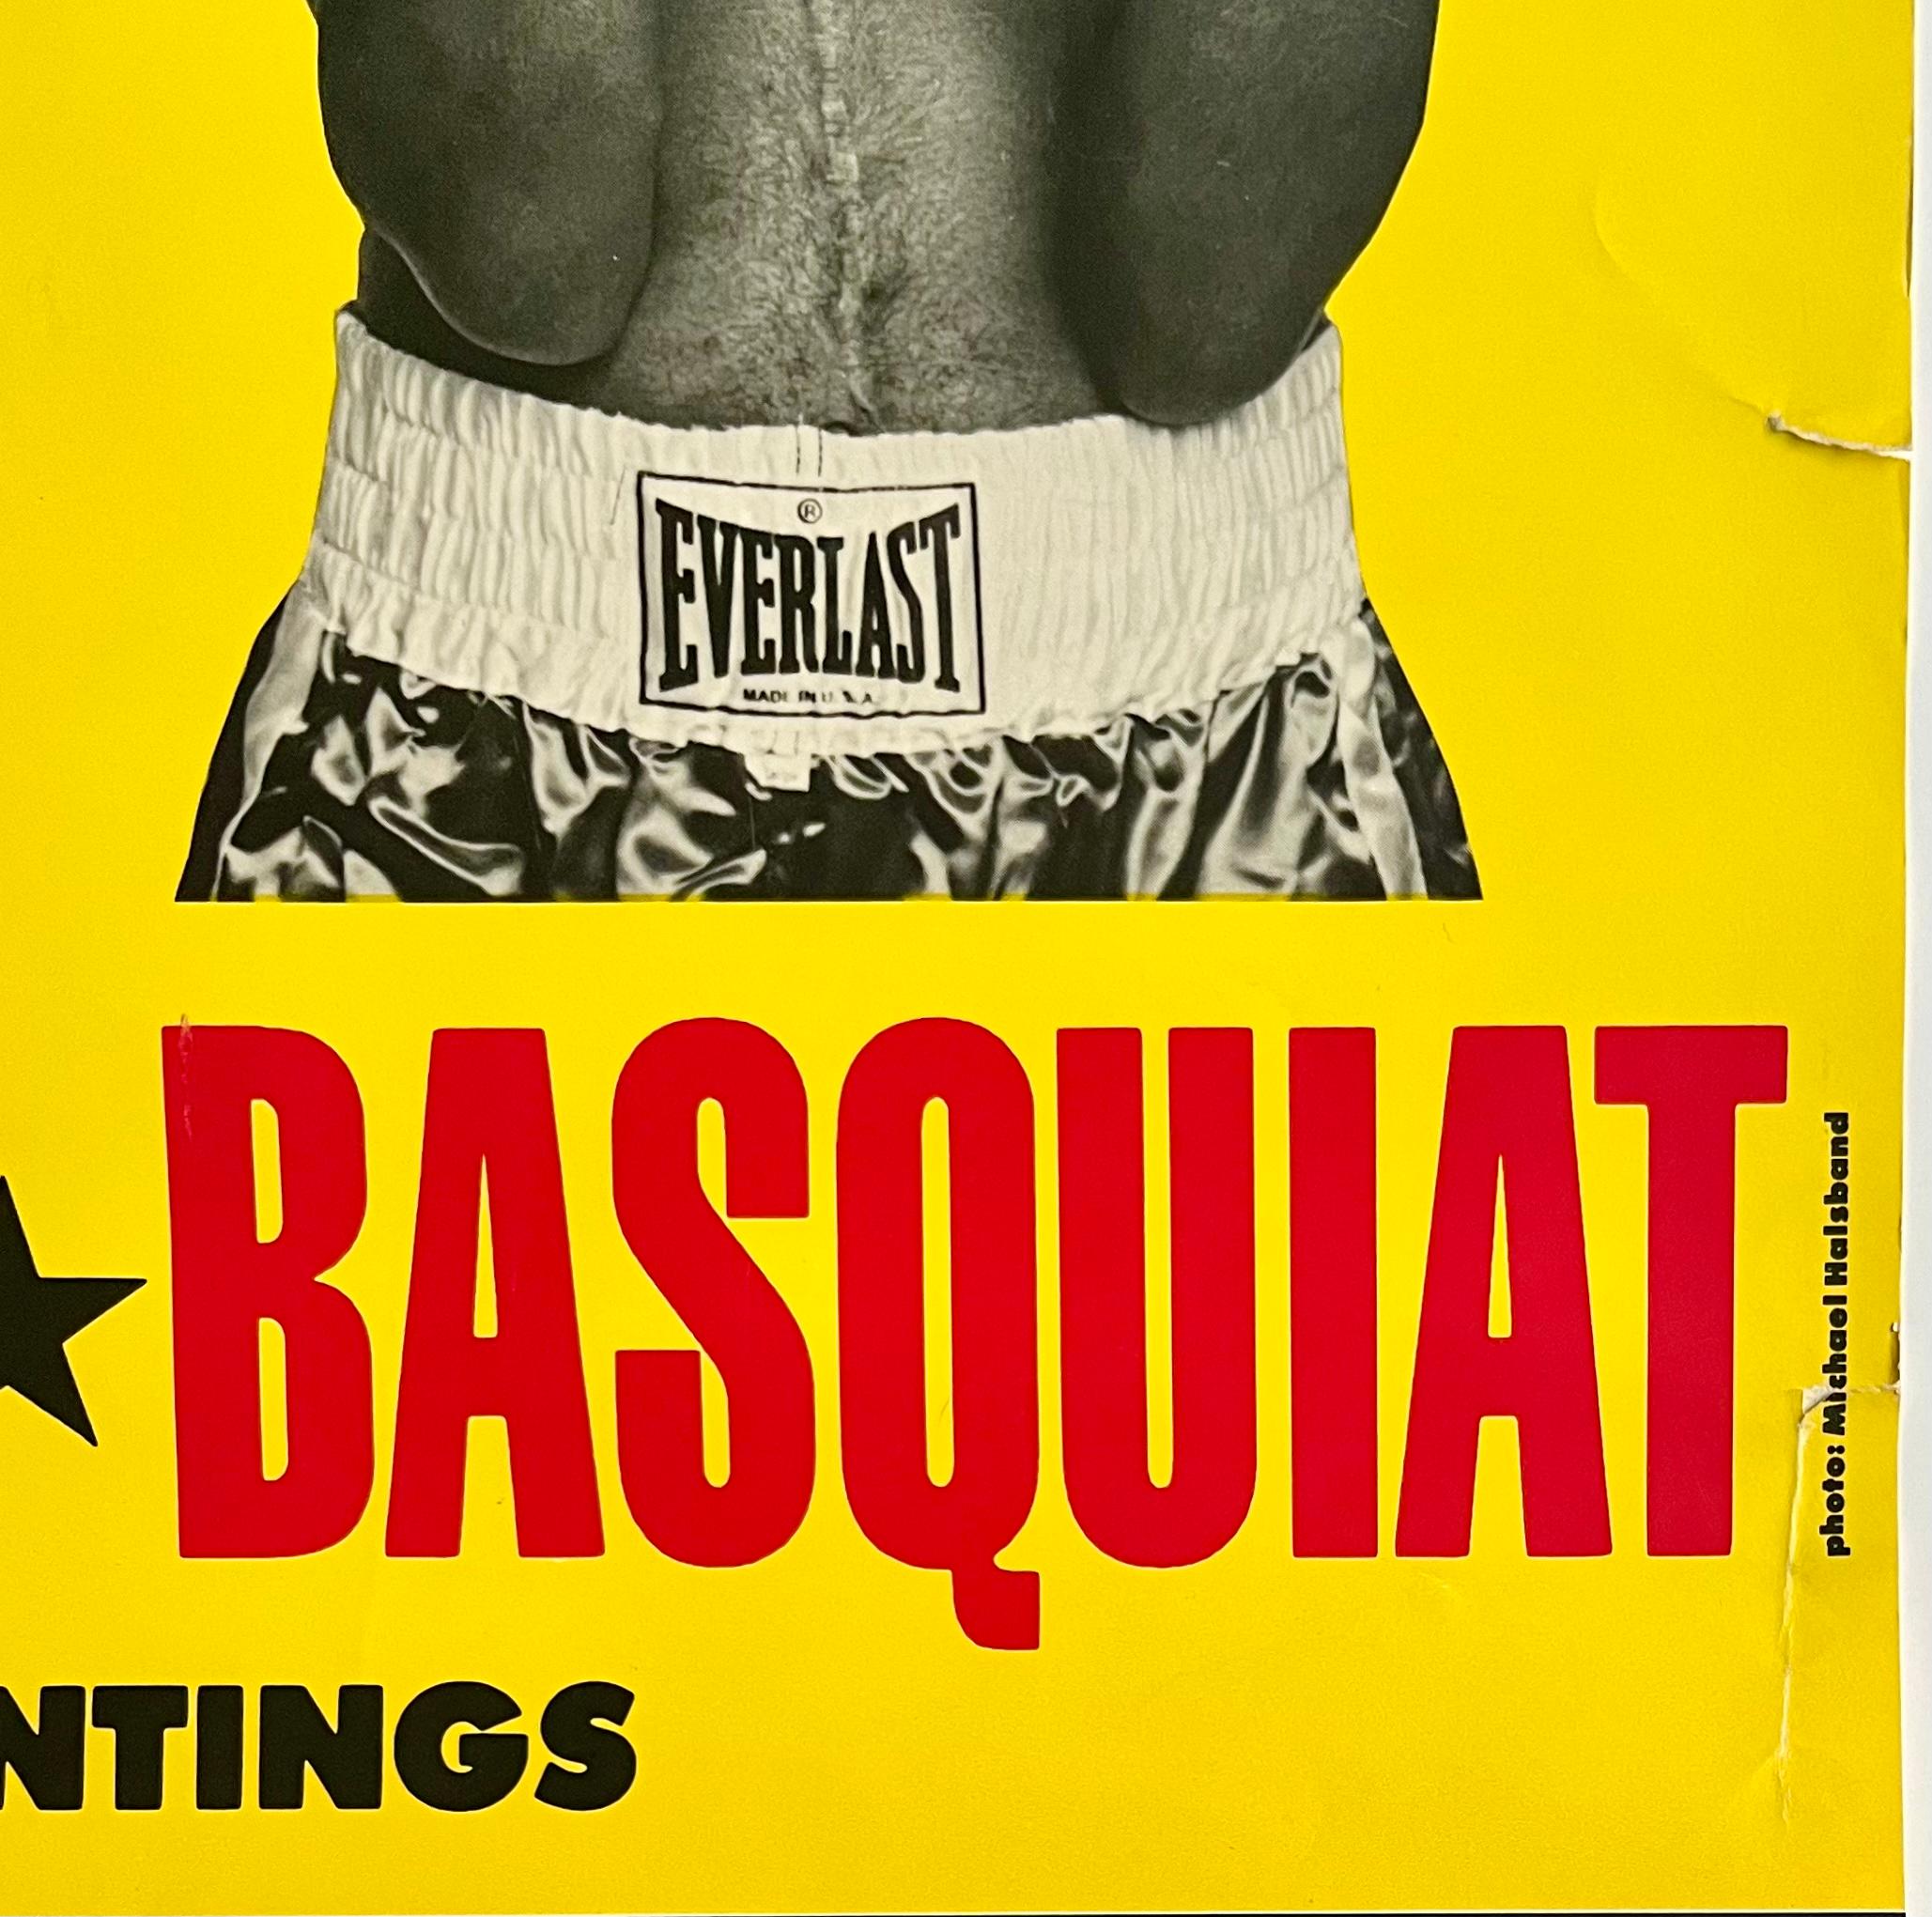 Andy Warhol Jean-Michel Basquiat Boxing posters 1985: Complete set of 2 works: 
The most sought-after of Basquiat/Warhol collectibles in existence - presented as a complete set of 2.  Published by Tony Shafrazi and Bruno Bischofberger on the